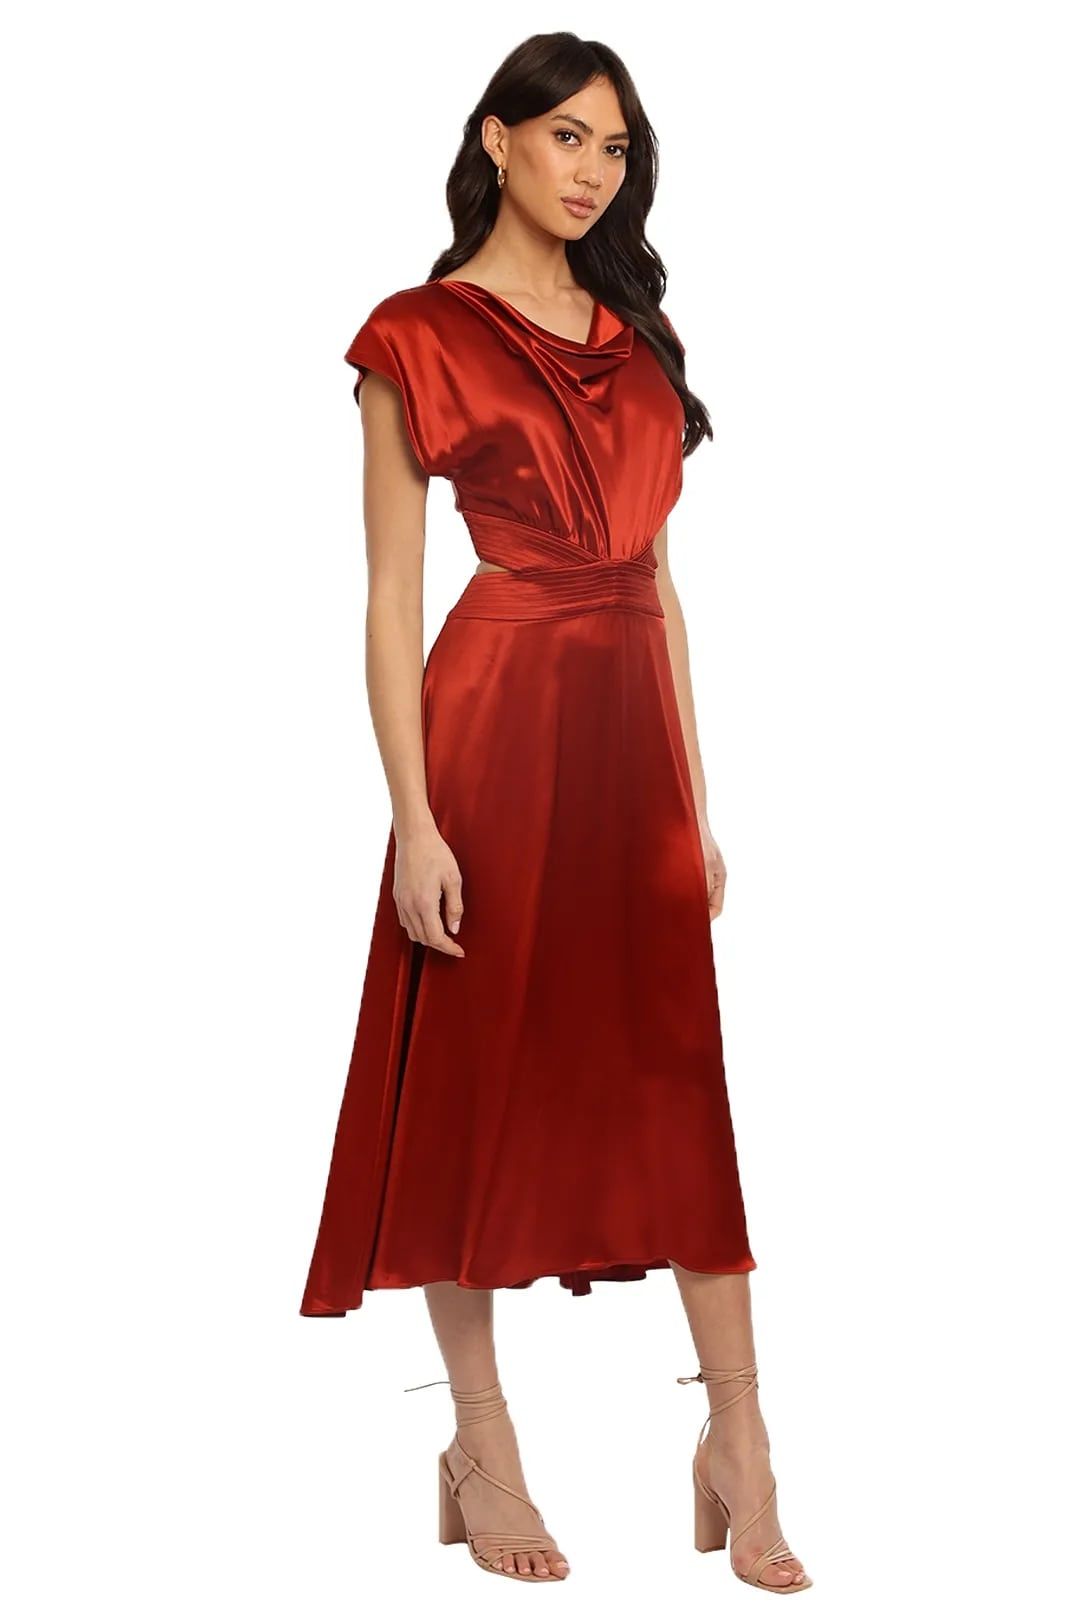 Rent Plympton dress in red for evening parties.